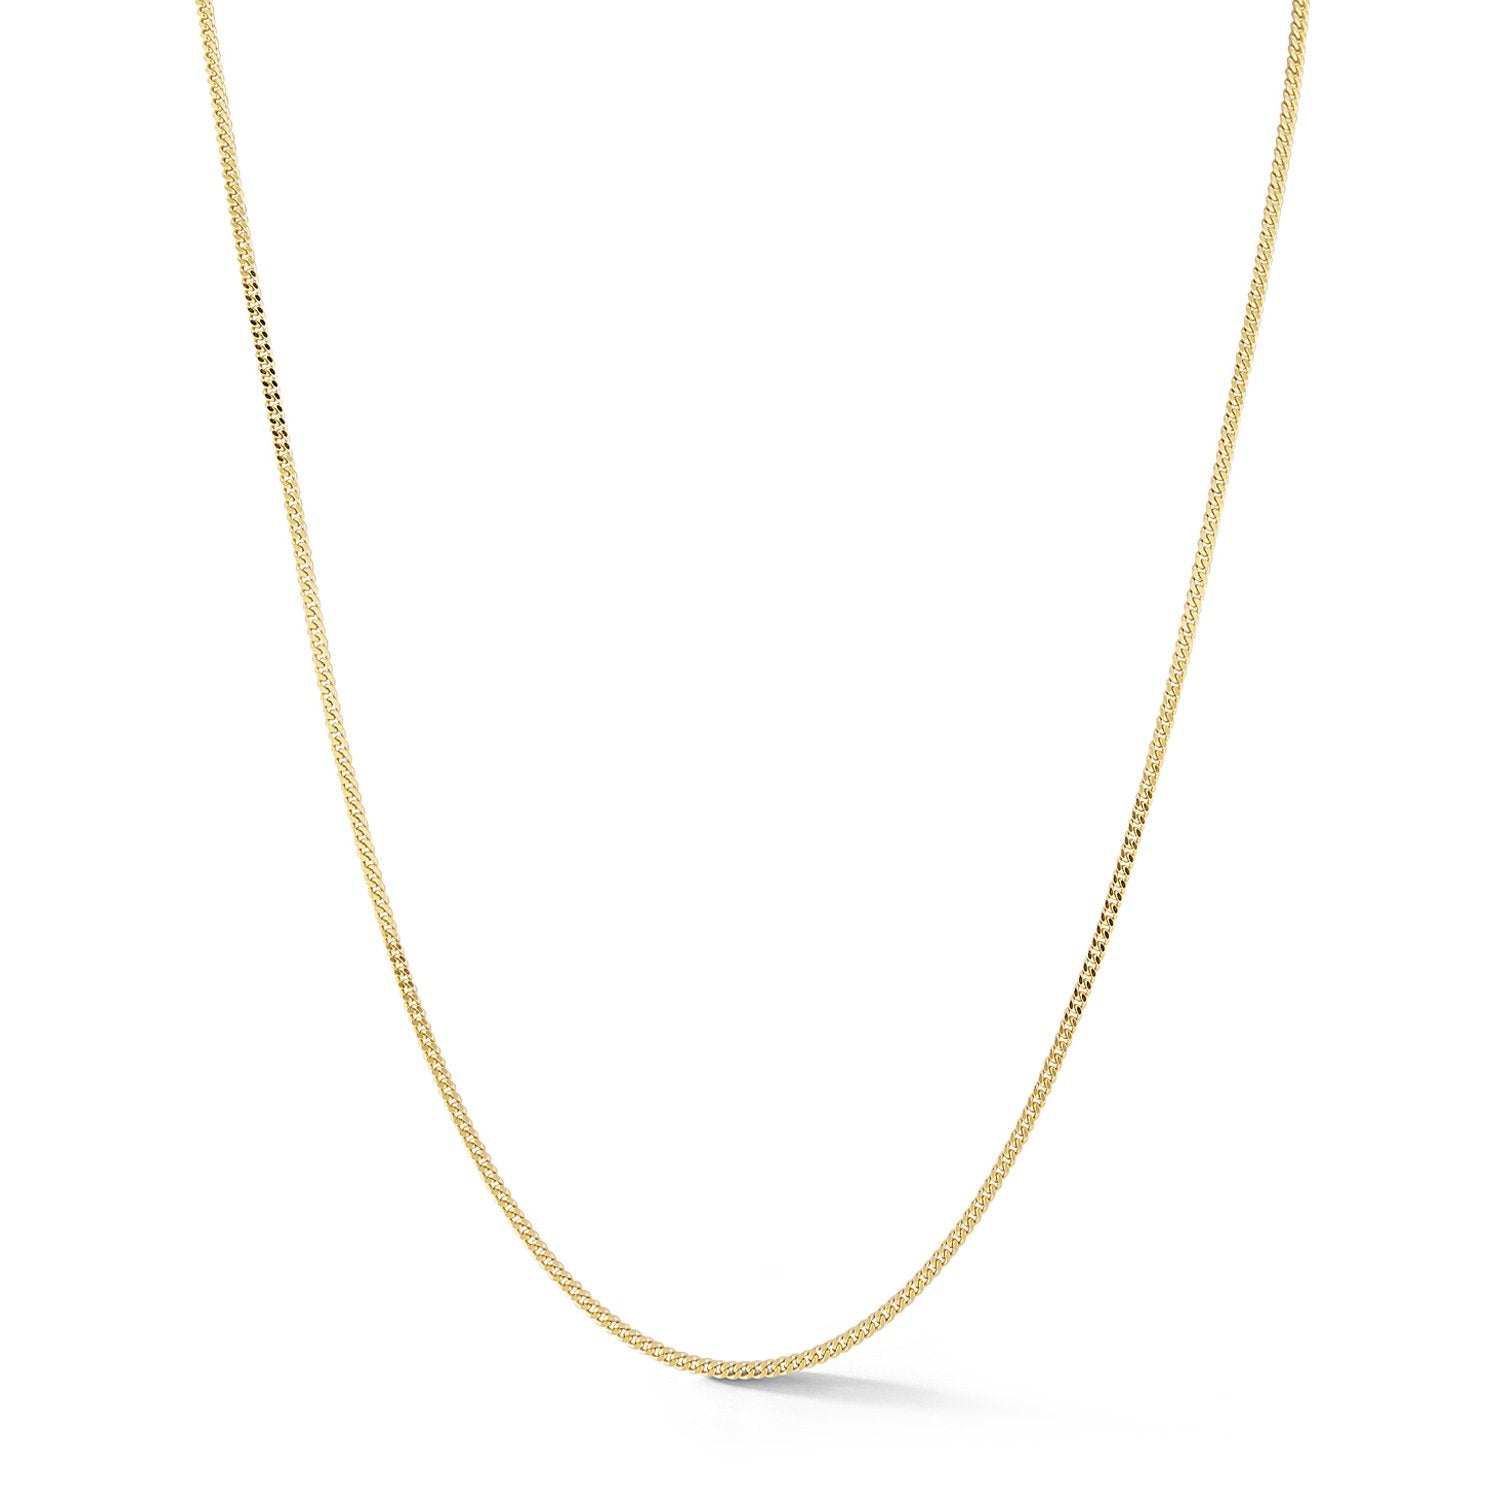 Curb Link Chain Necklace in 18K Yellow Gold